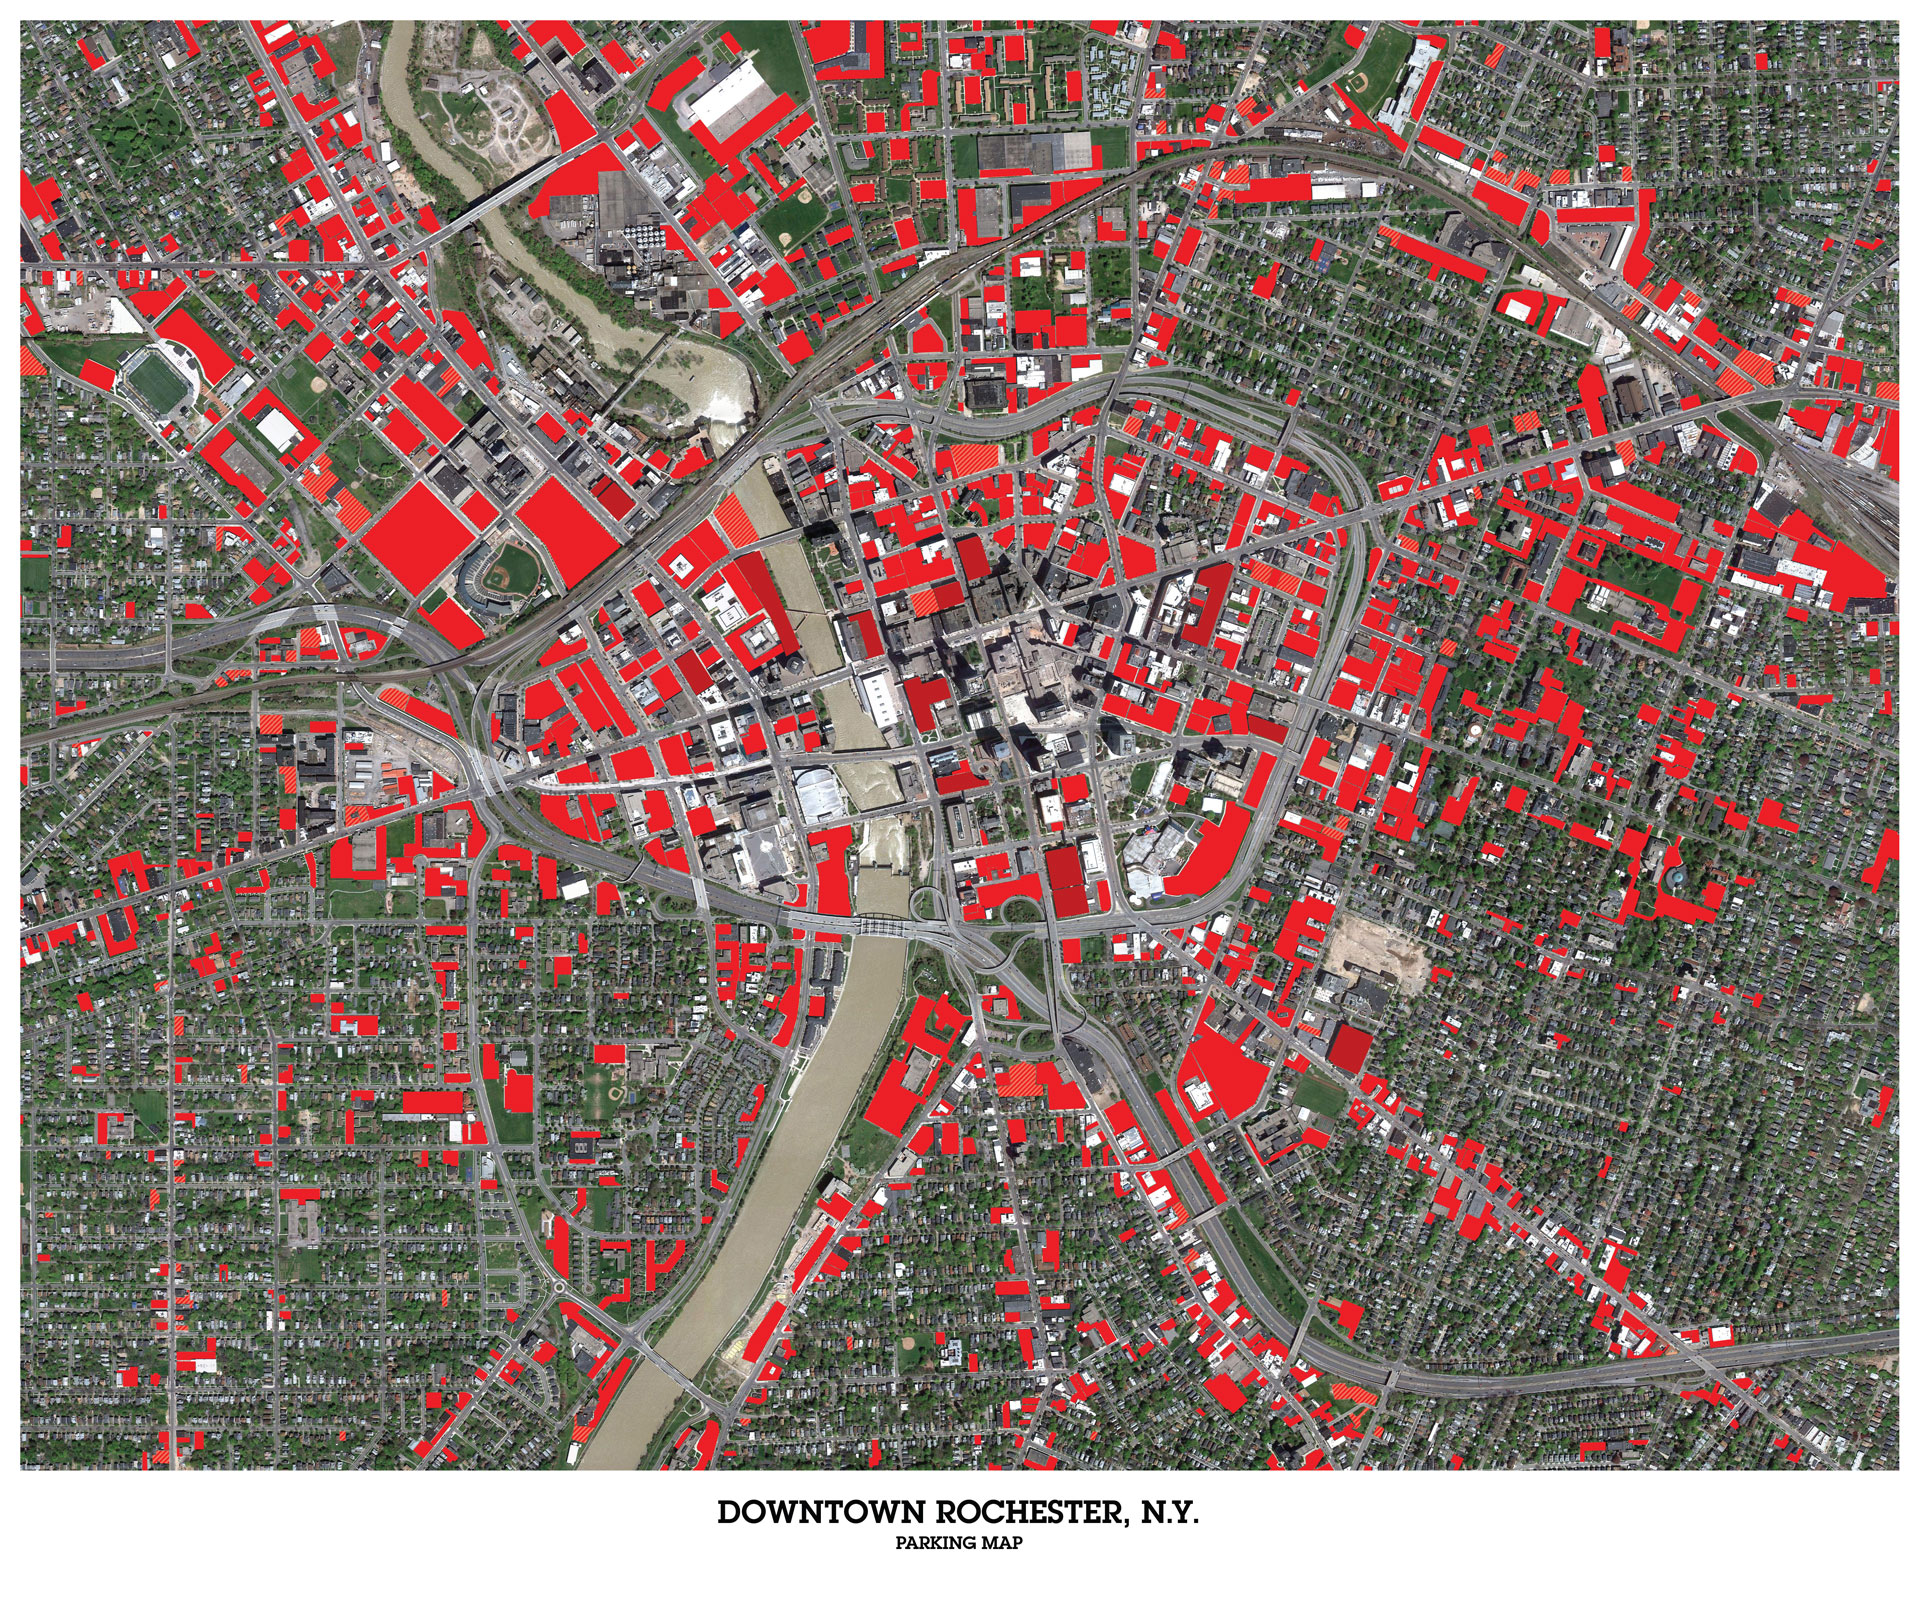 Downtown Rochester, N.Y. satellite view of parking areas.